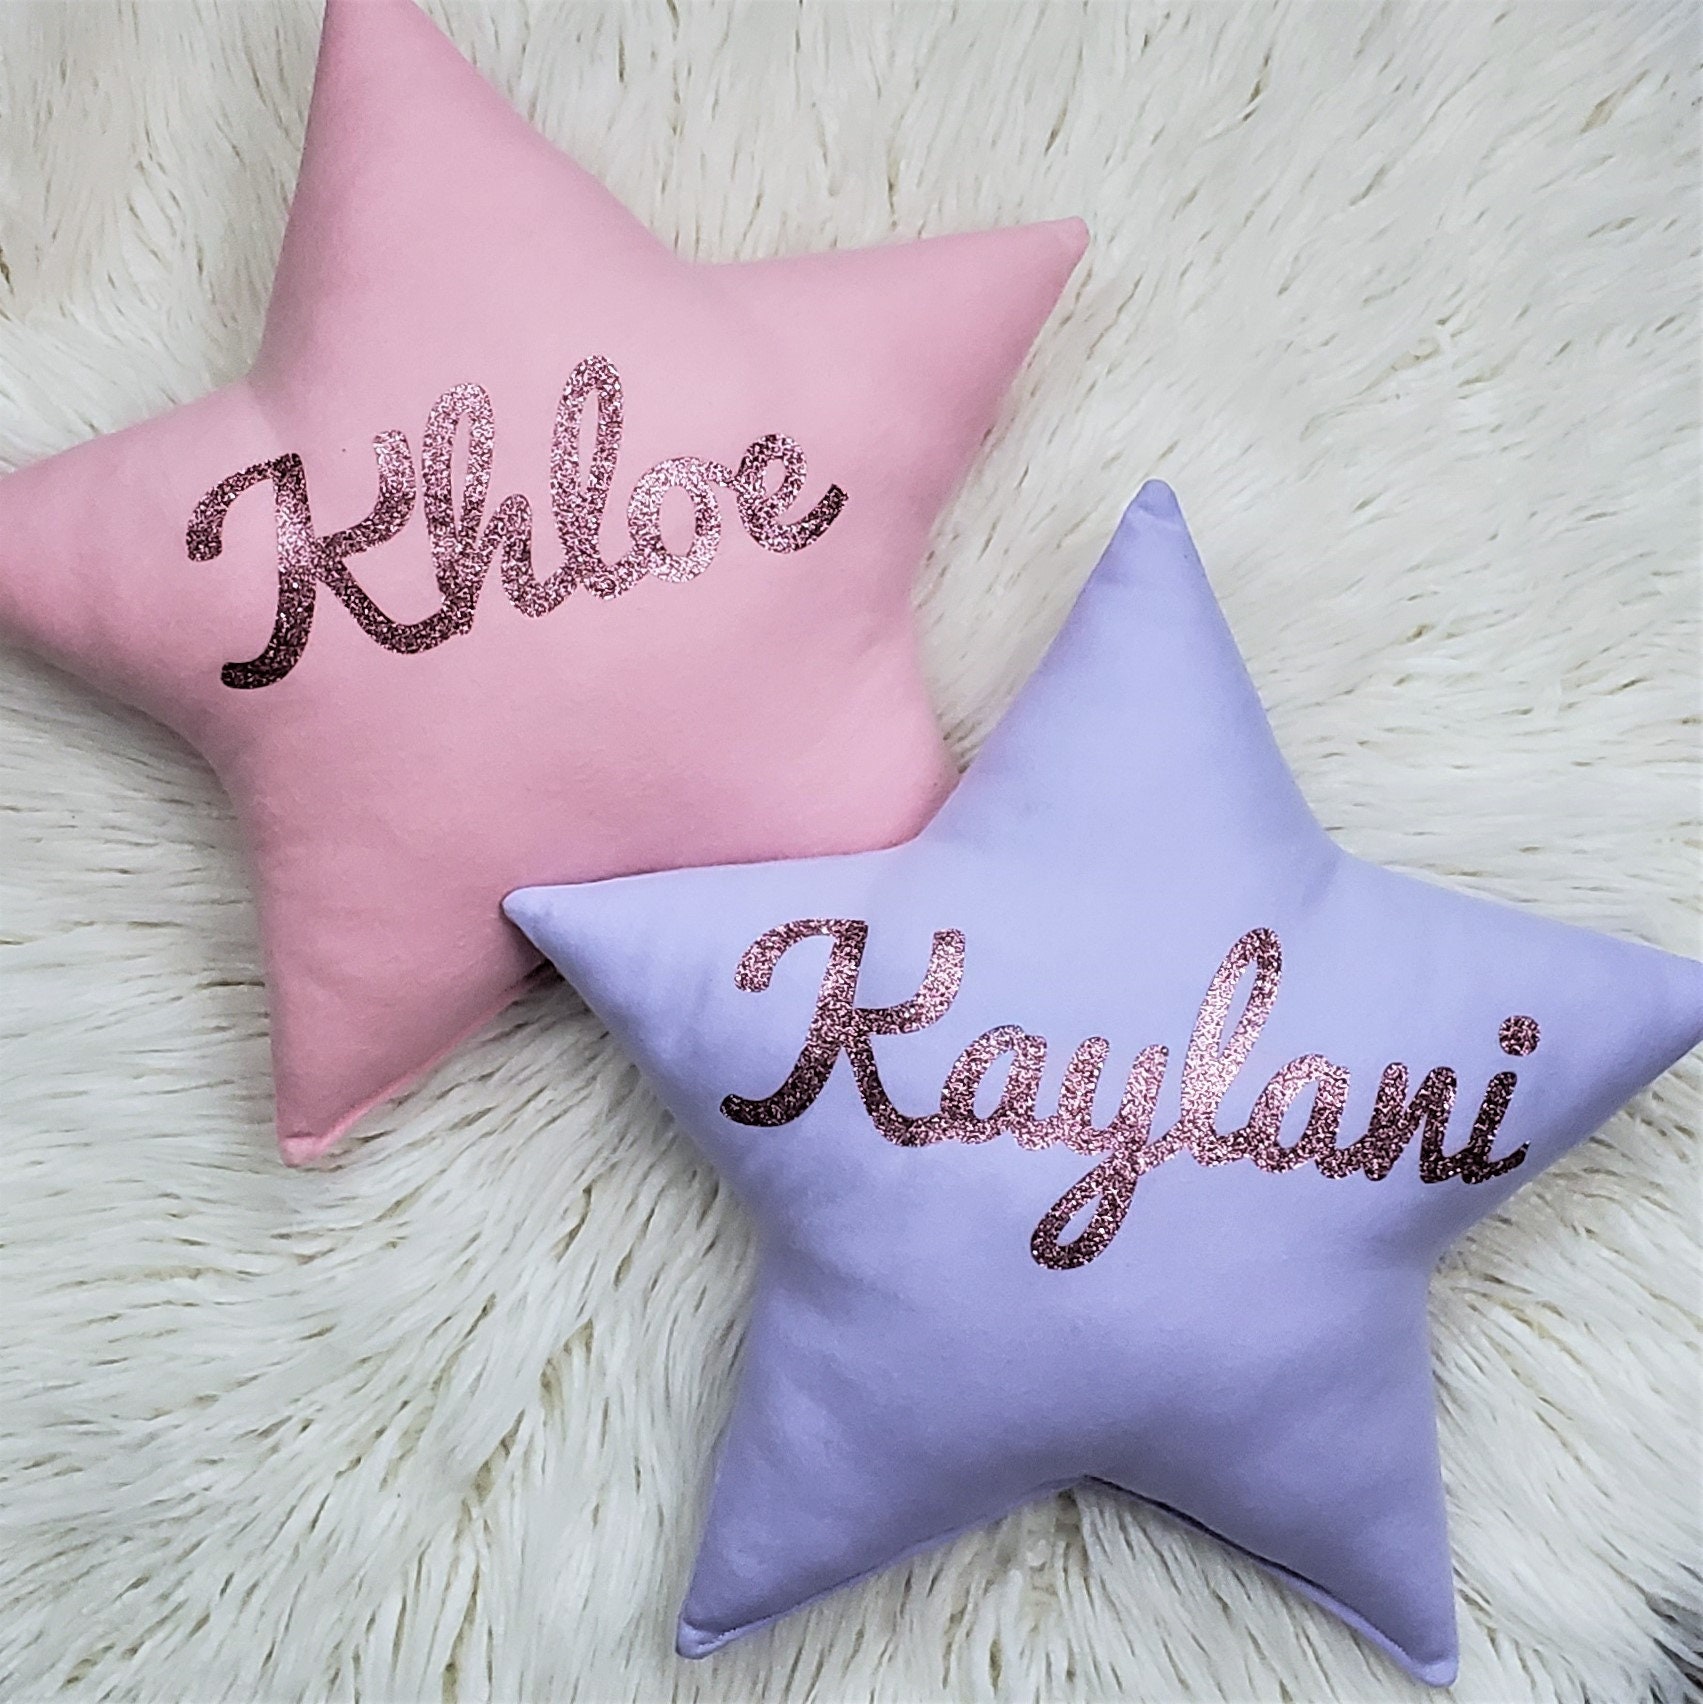 Perfectto Design Set of 2 Kid's Decorative Pillows for Girls Toddler Room -  Fluffy White Star Pillow and Aqua Teal Plush Pillow, Soft Girls Pillows